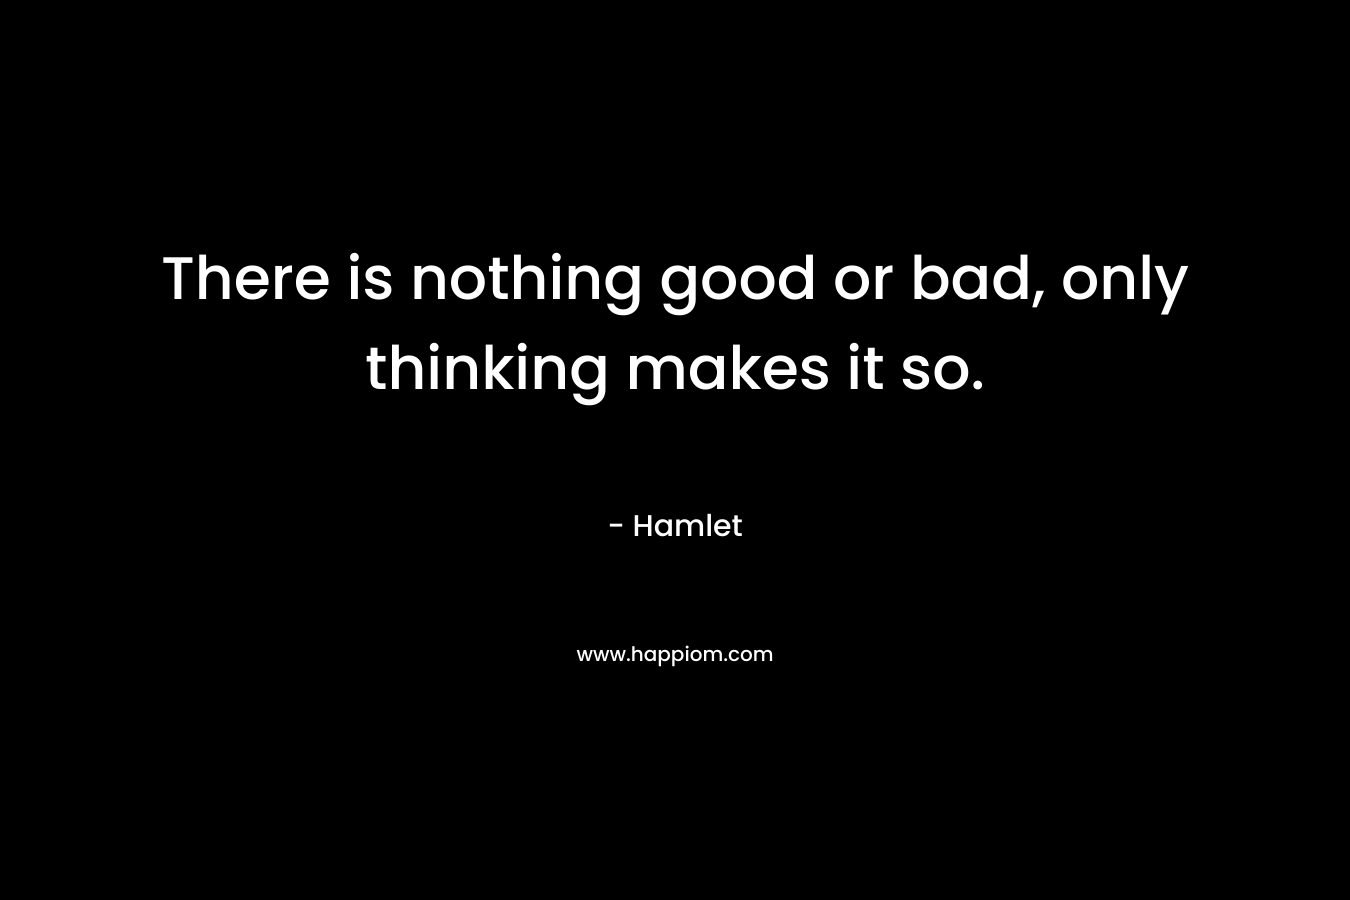 There is nothing good or bad, only thinking makes it so.